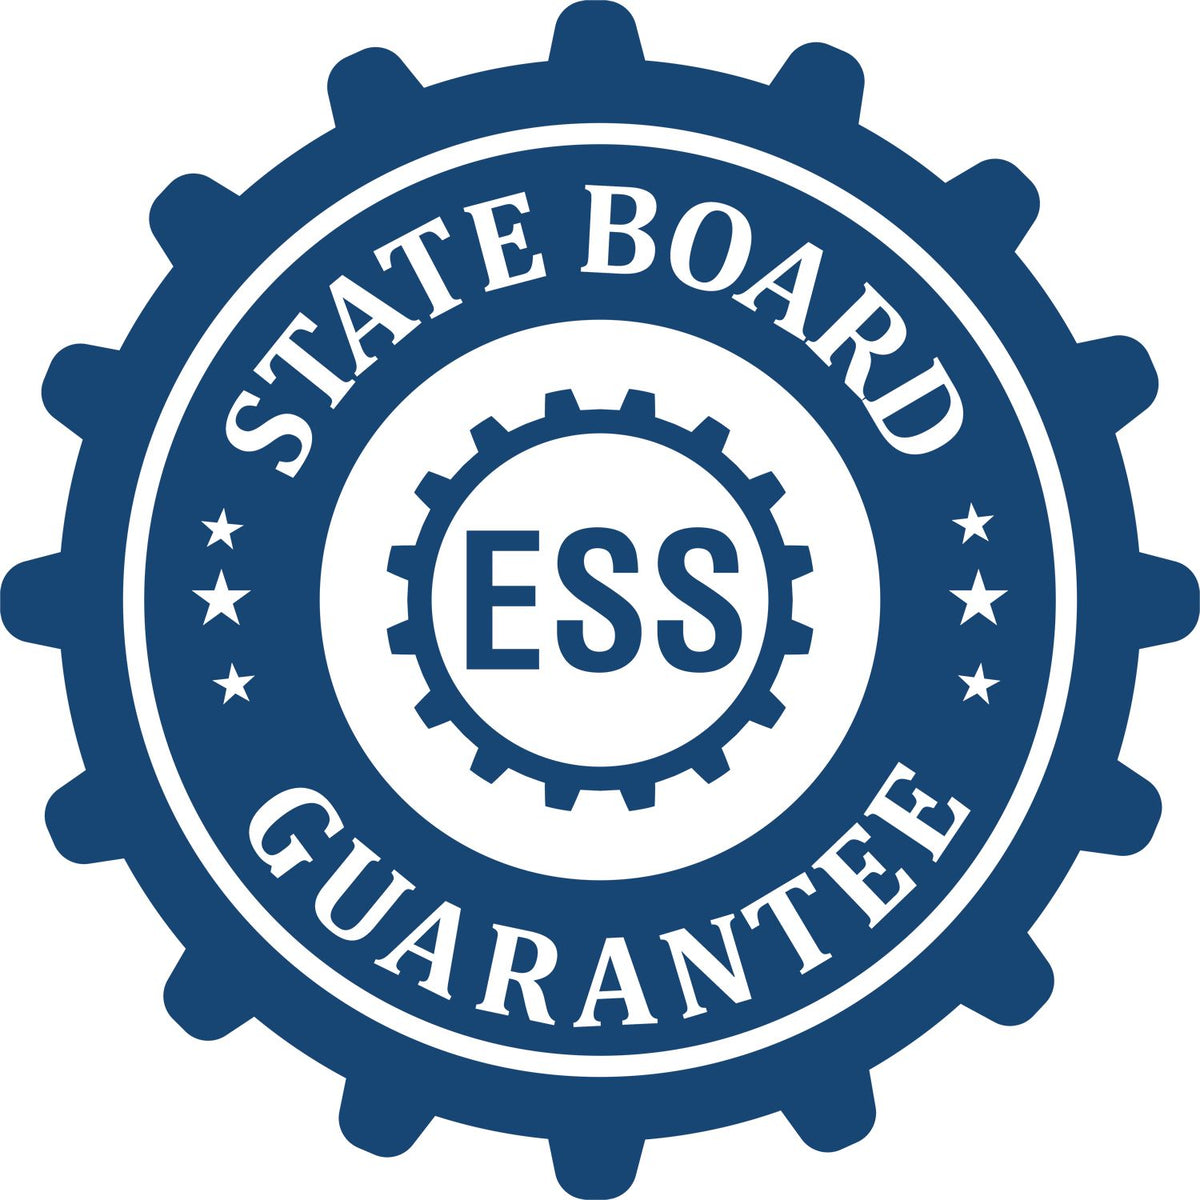 An emblem in a gear shape illustrating a state board guarantee for the Soft Virginia Professional Engineer Seal product.